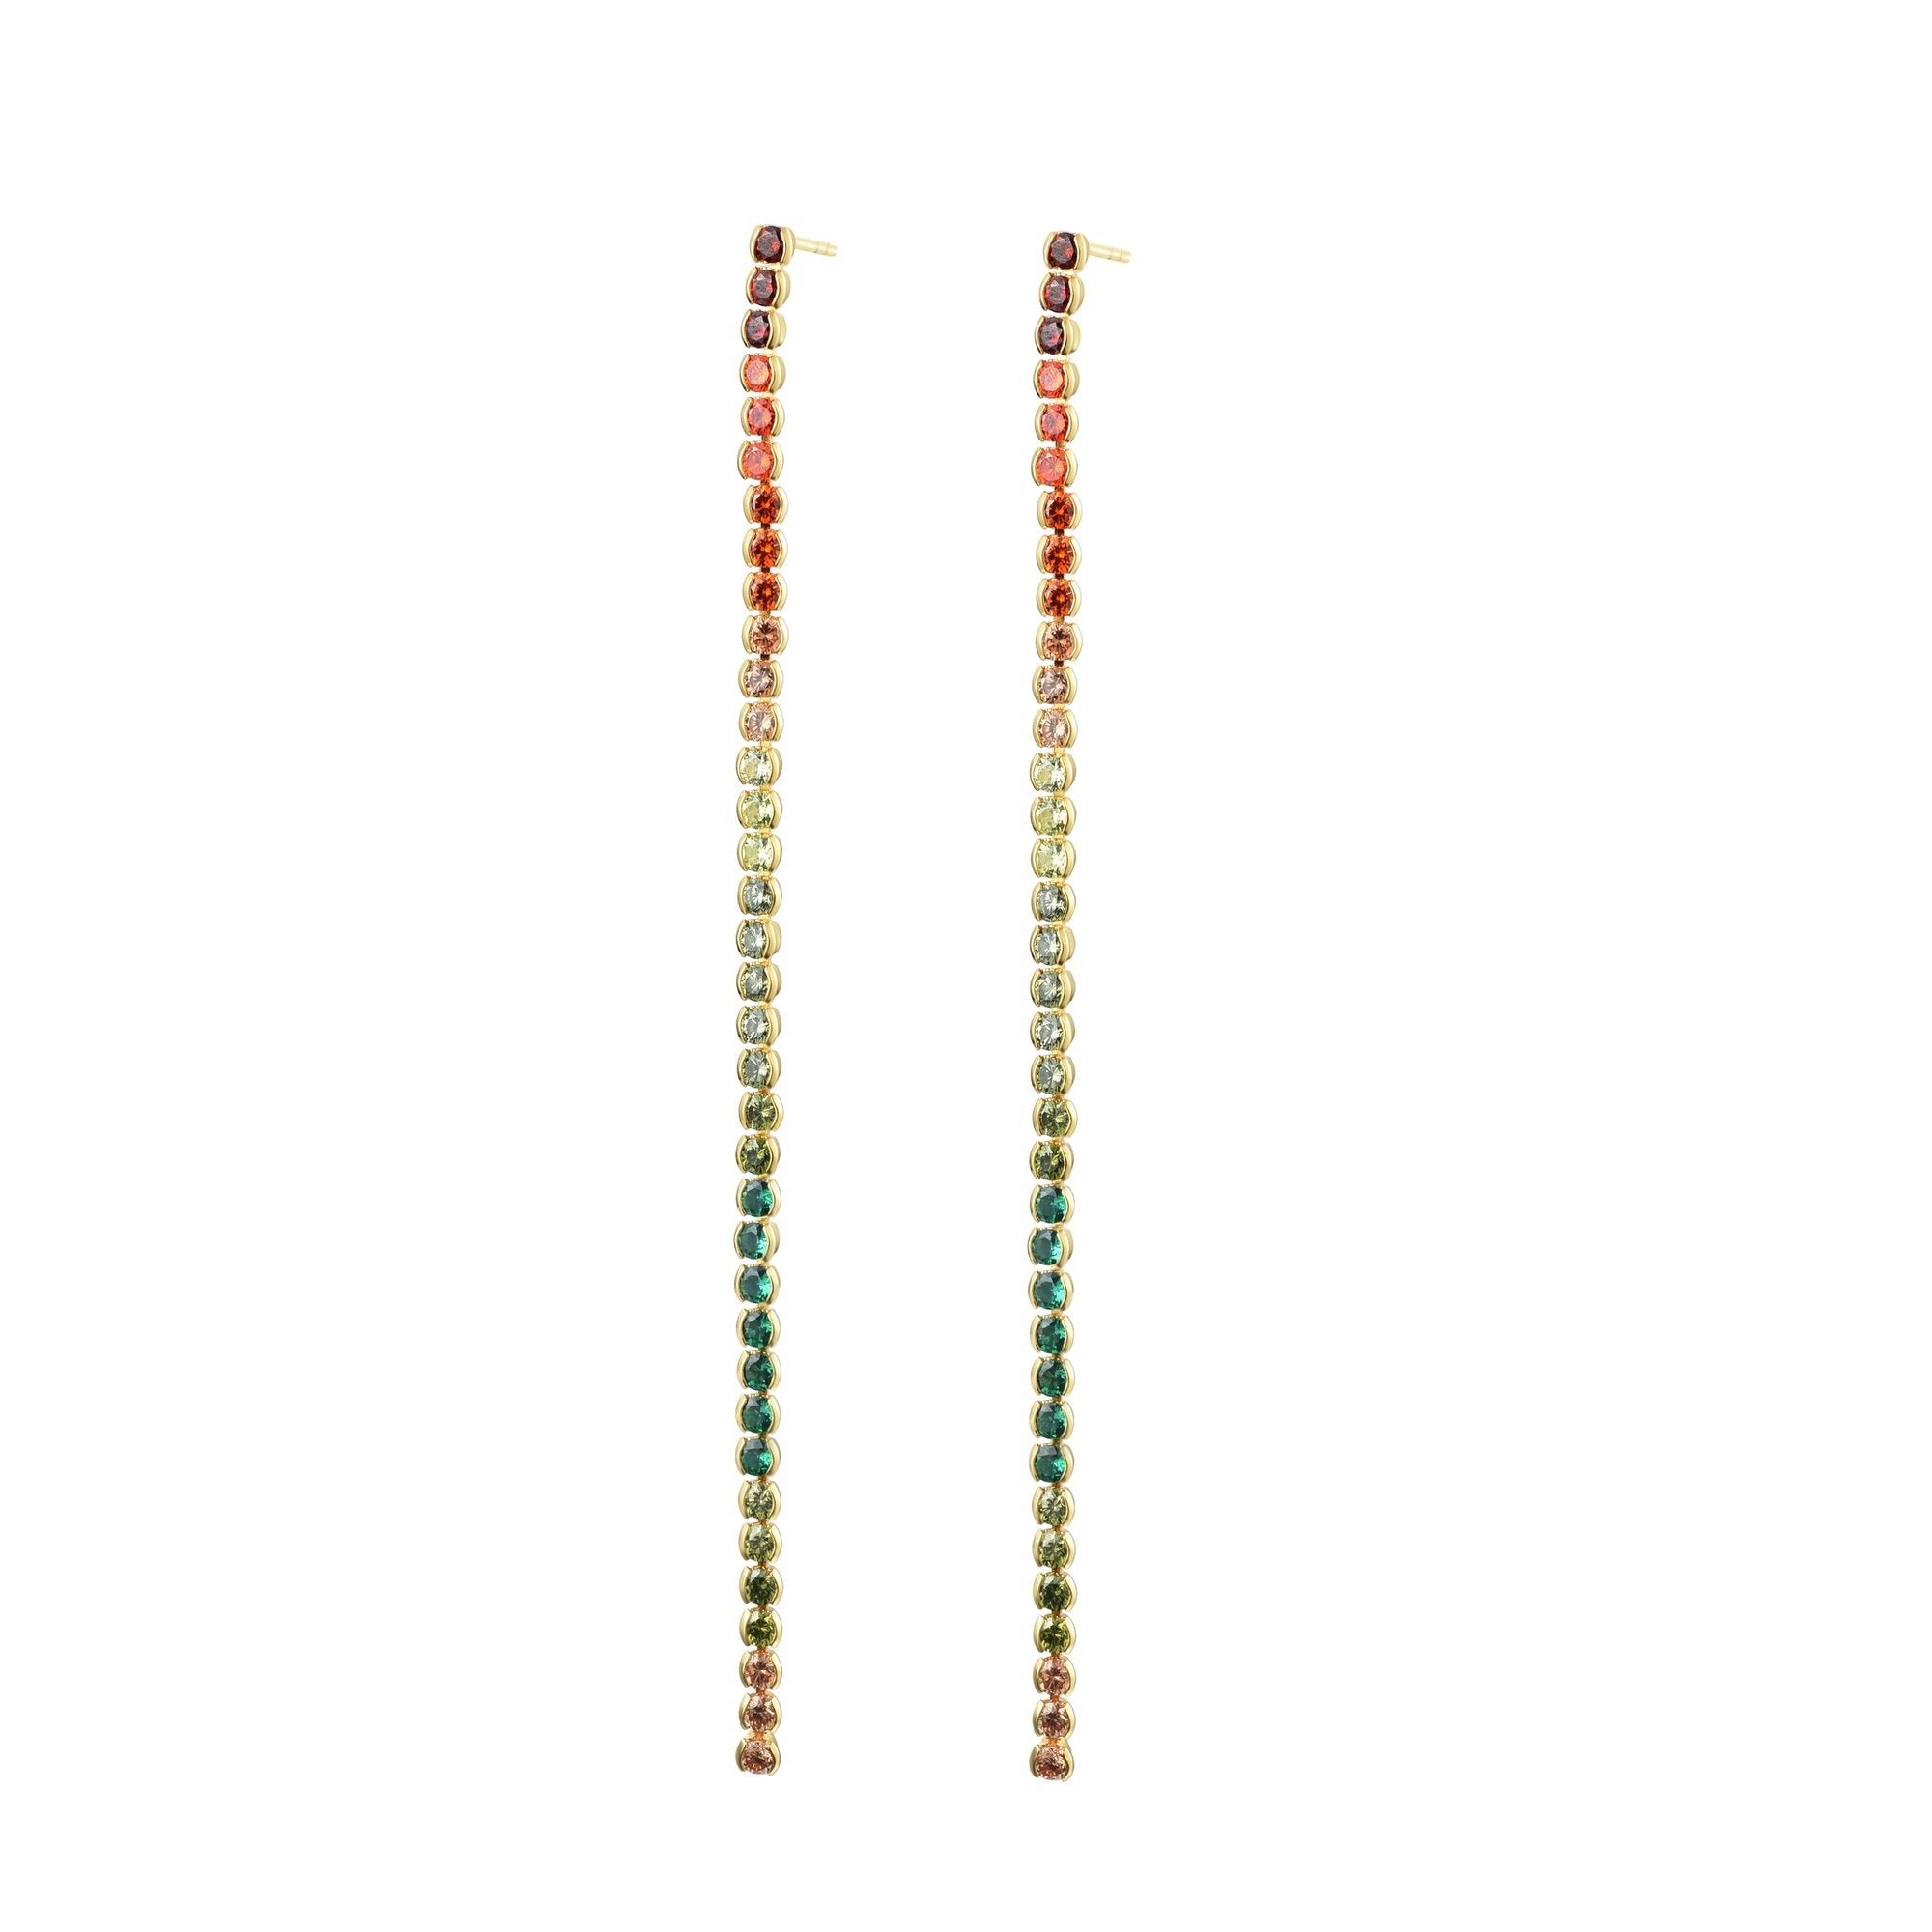 Ferentina | Macaron Earrings | 925 Silver | Multicolor CZ | 18K Gold Plated